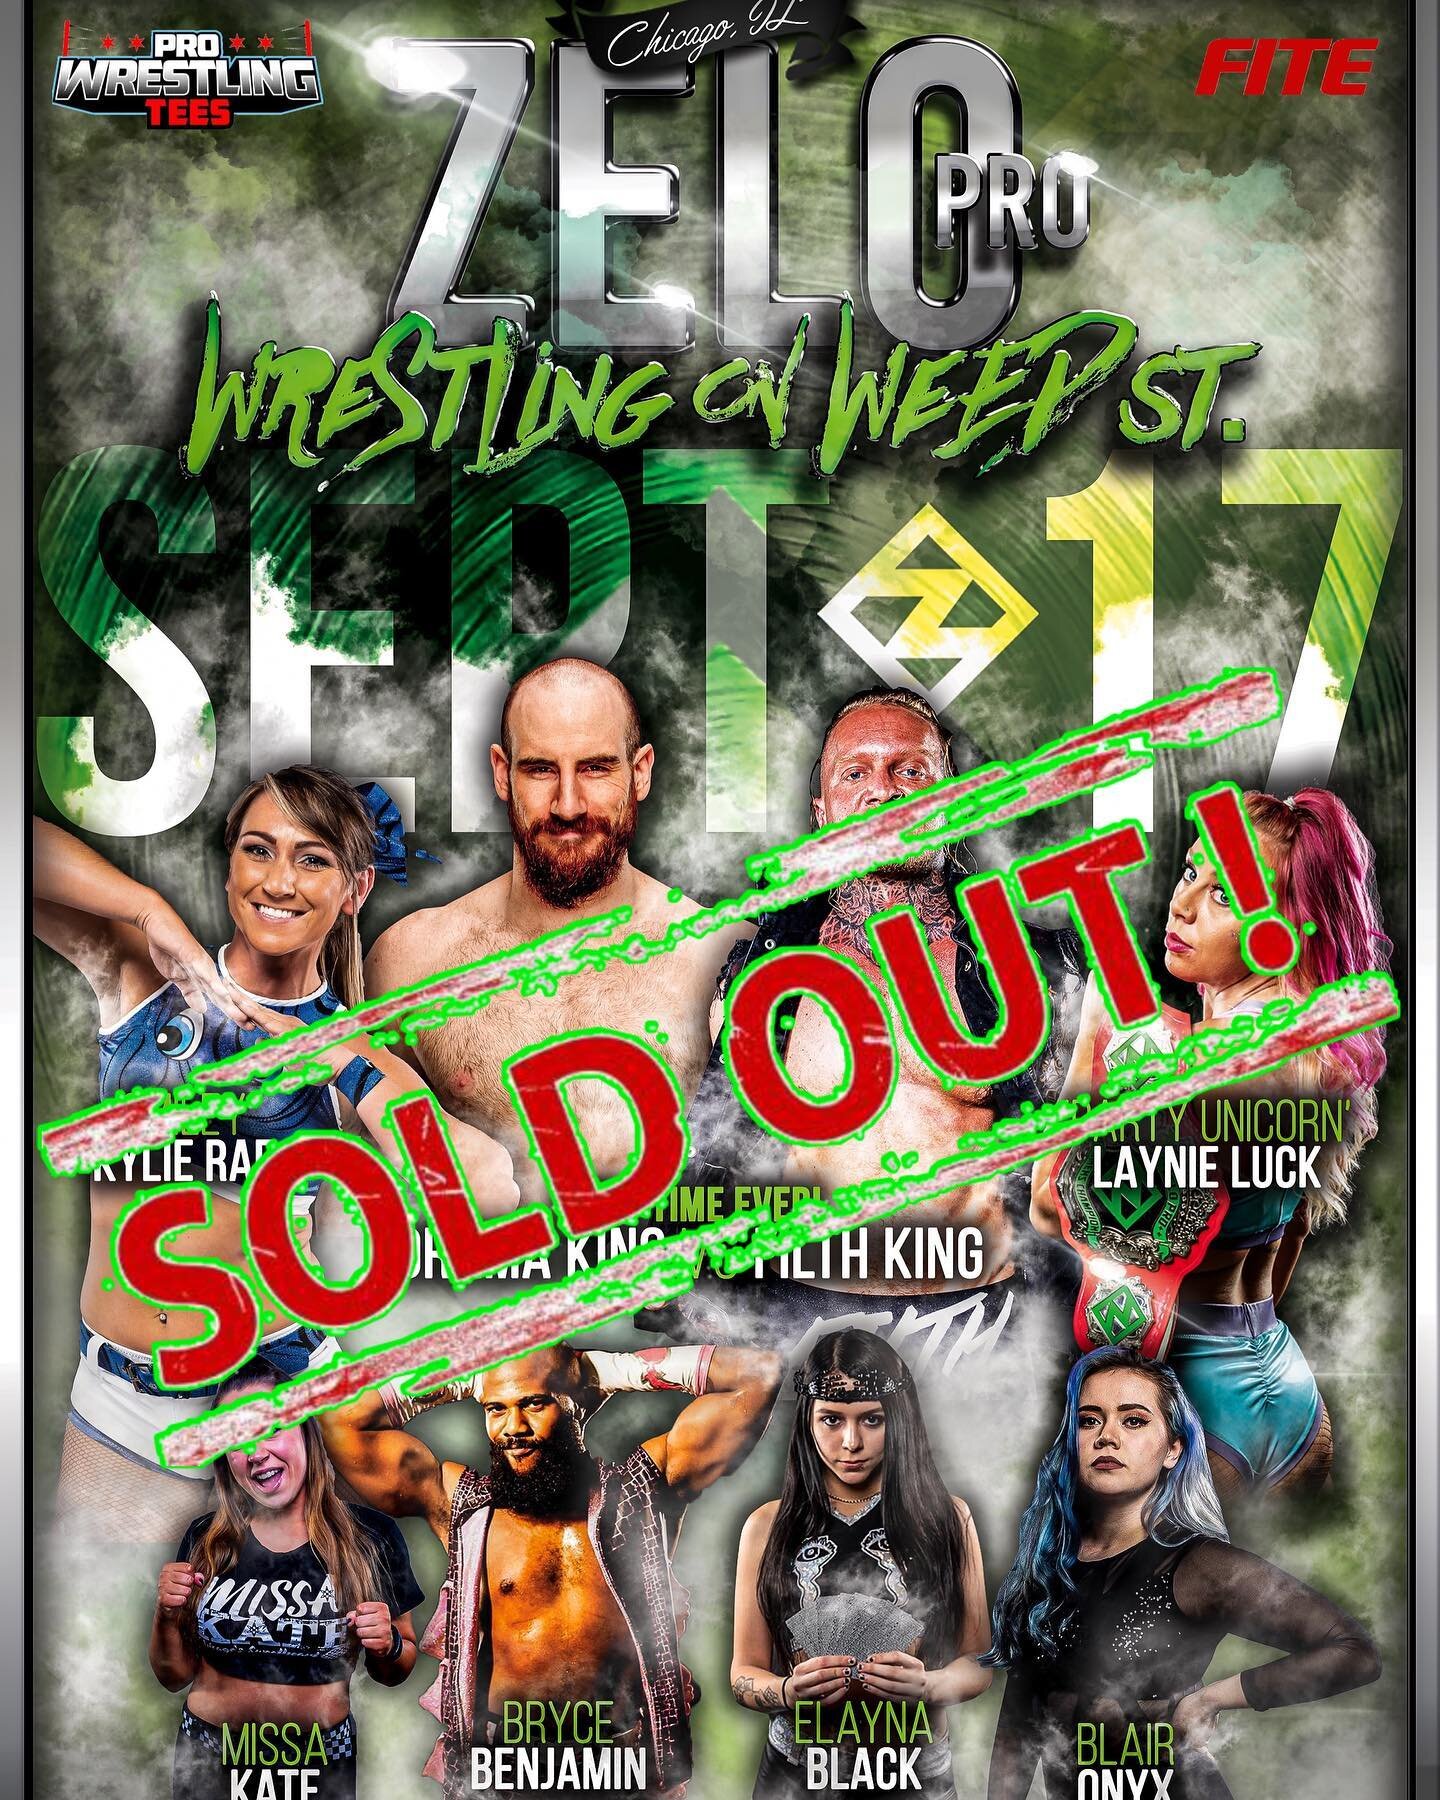 We are officially SOLD OUT!

If you didn&rsquo;t get to grab your tickets to #WrestlingOnWeedSt be sure to join us live on @fitetv!

https://www.fite.tv/watch/zelo-pro-wrestling-on-weed-st/2p80u/